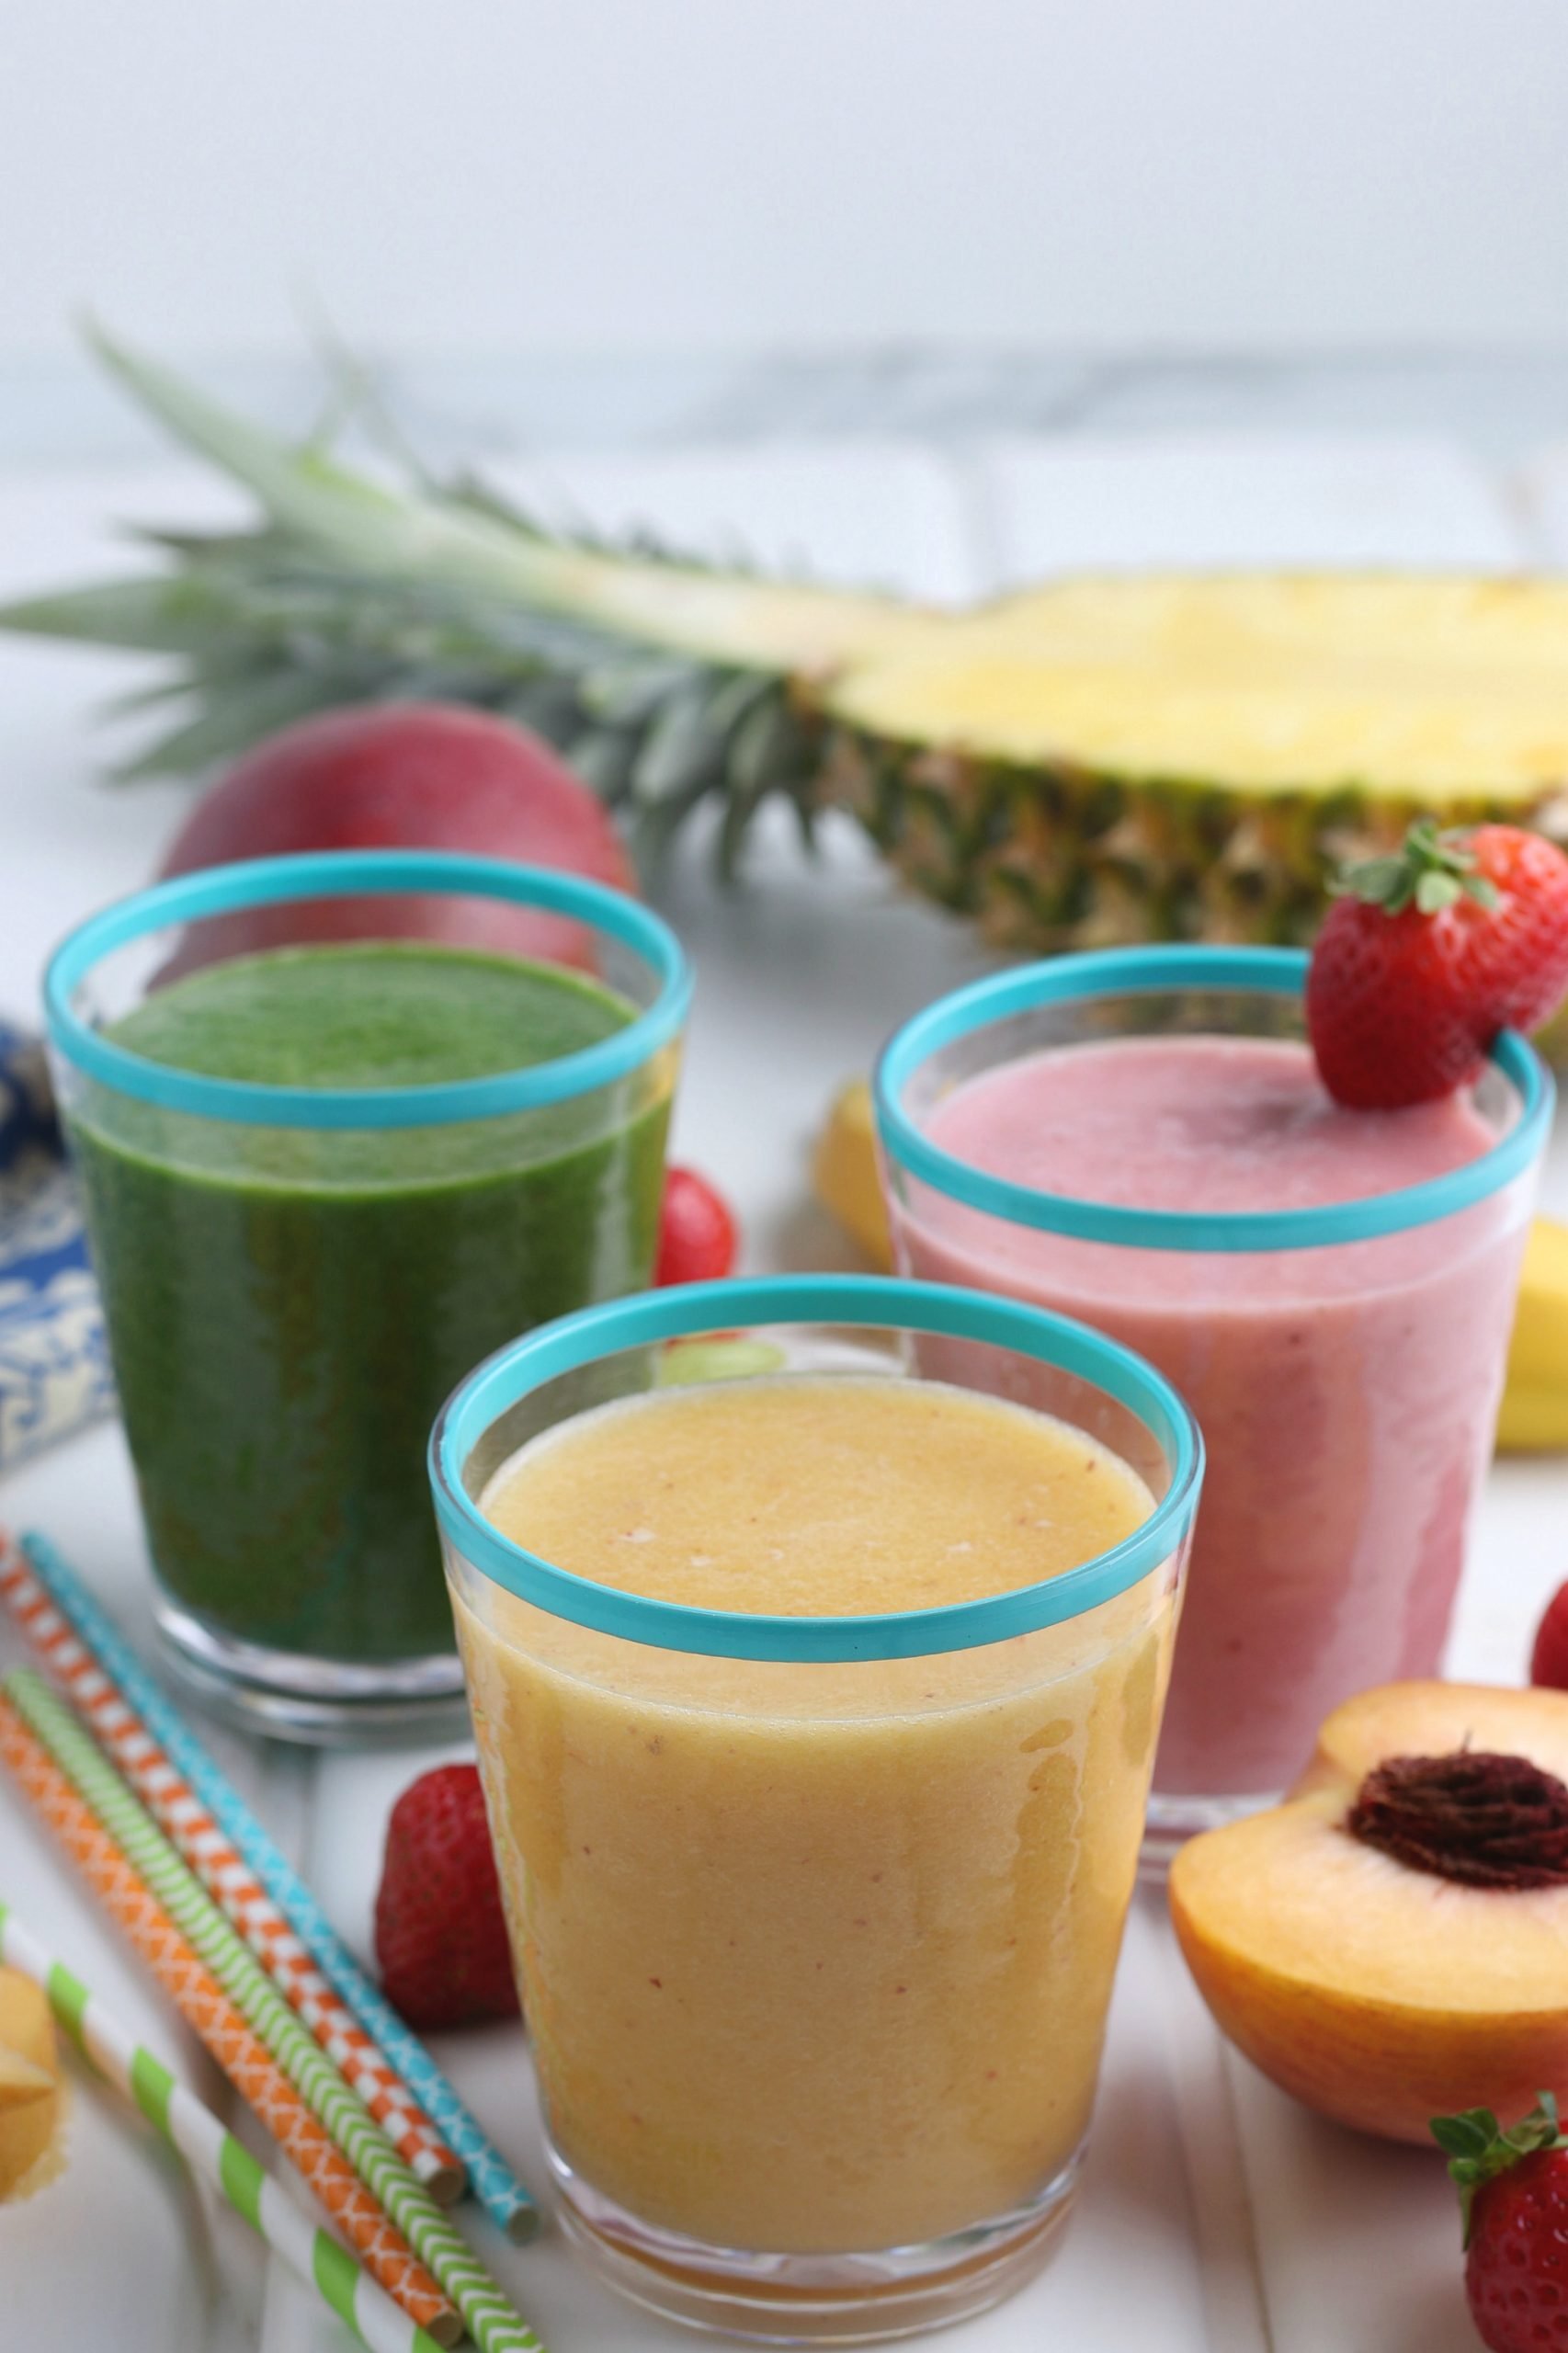 Healthy Smoothies To Start Your Morning the Right Way!